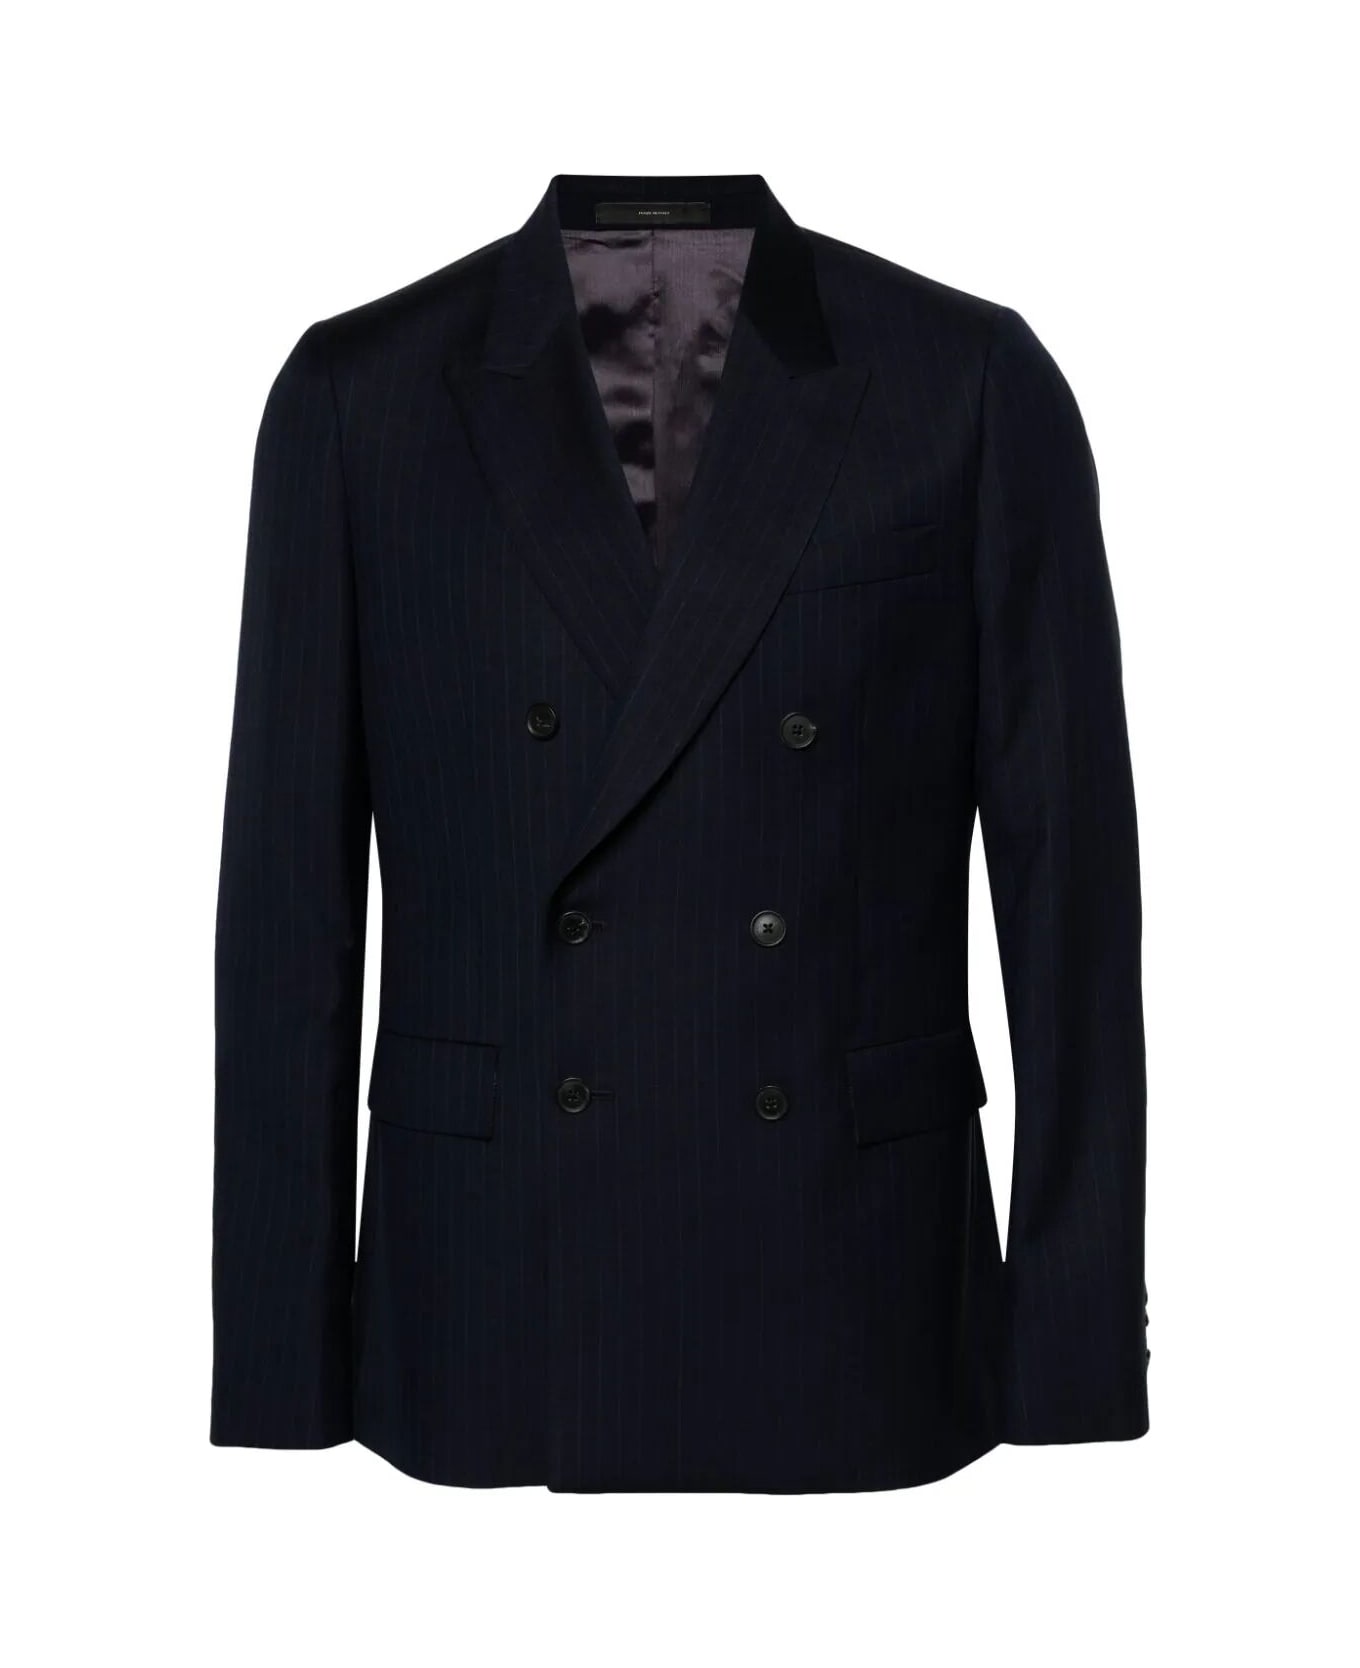 Paul Smith Mens Two Buttons Jacket - Dark Navy